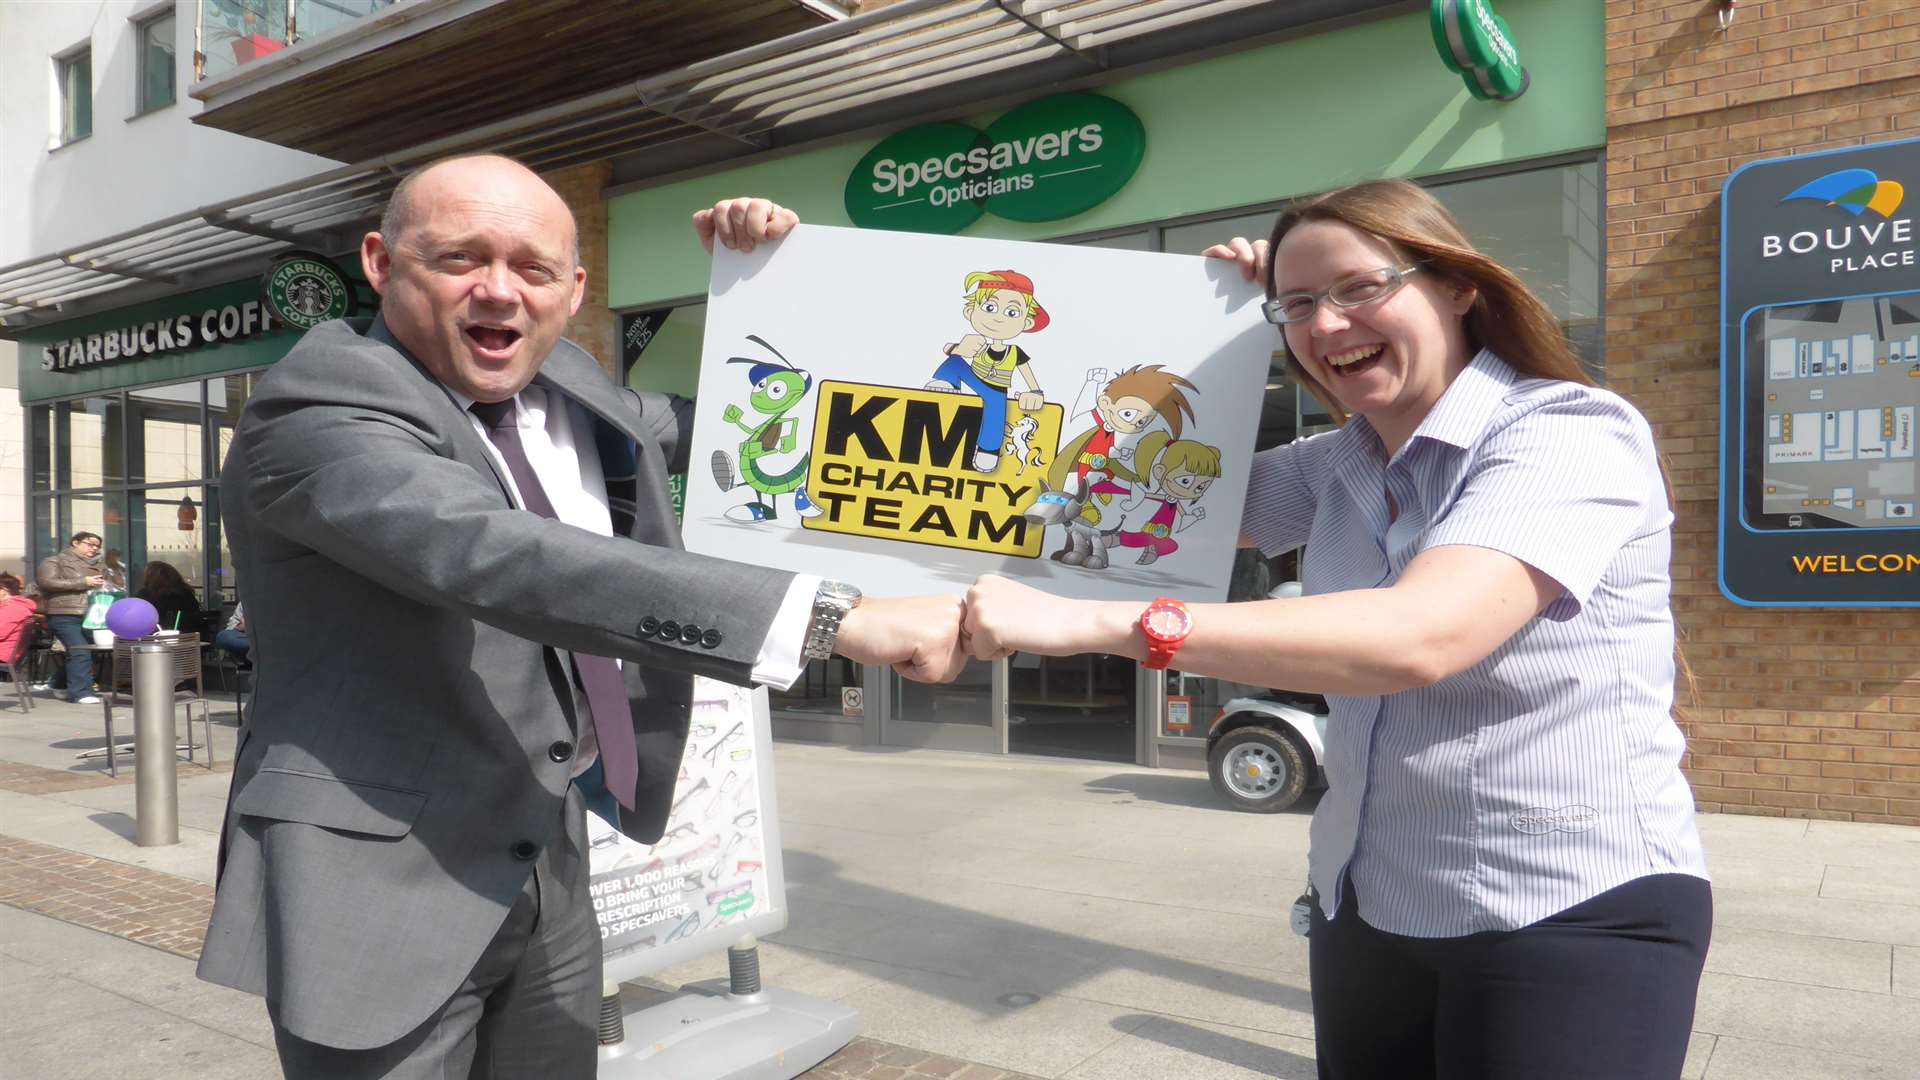 Folkestone Supersavers director David Cavender and manager Dani Ward showcase support for KM Charity Team's reading initiative Buster's Book Club.